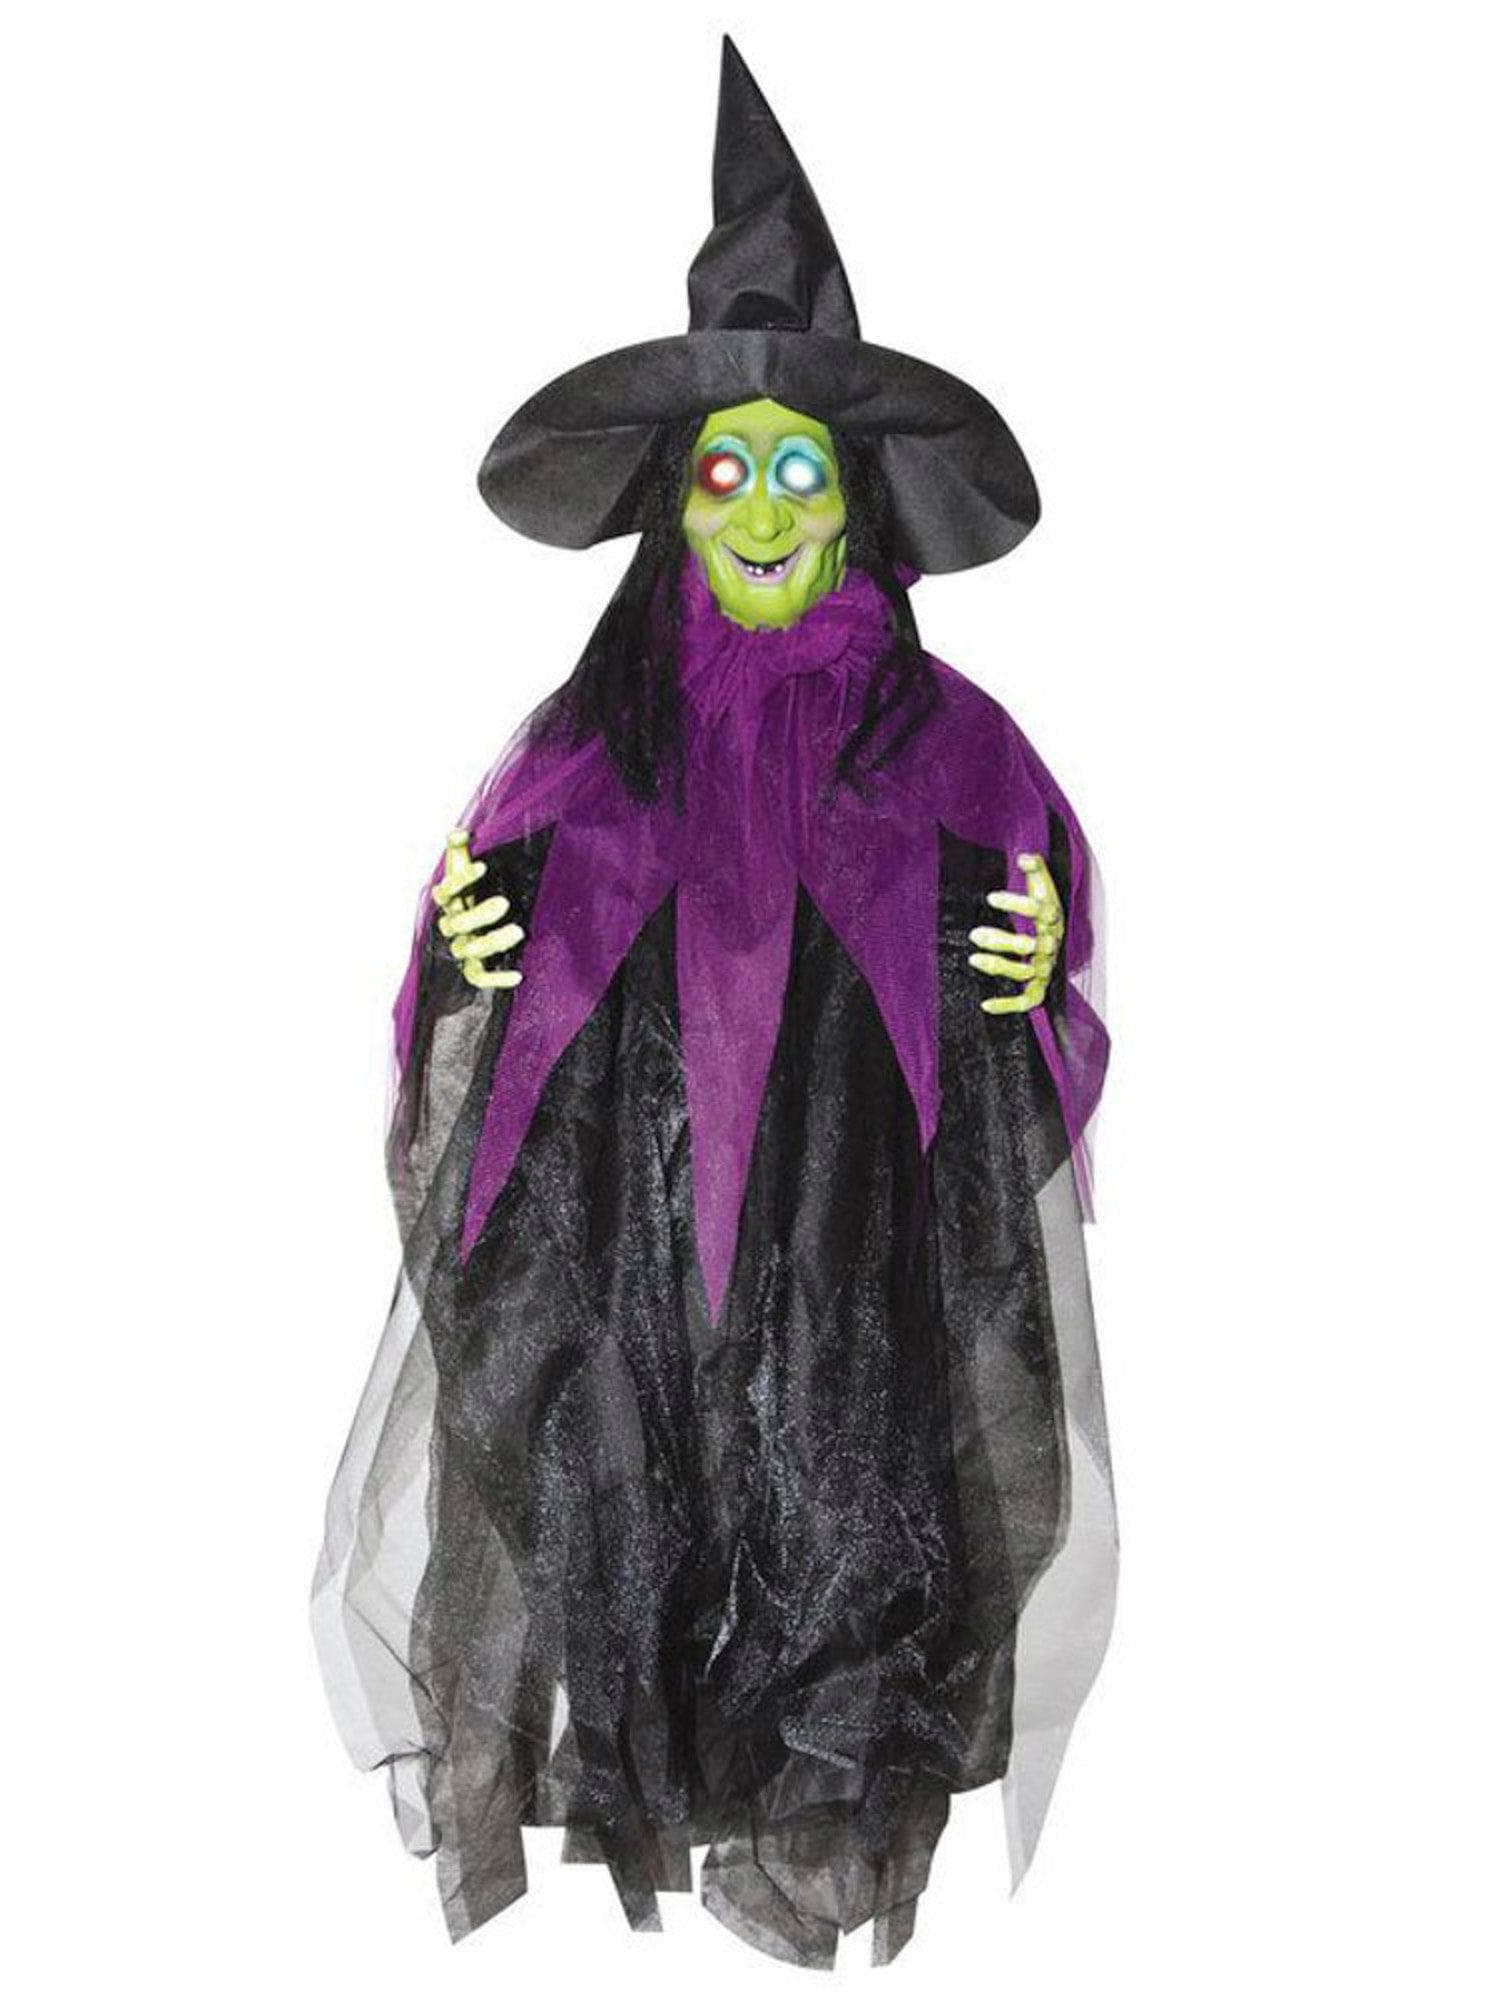 3 Foot Hanging Witch Light Up Animated Prop - costumes.com